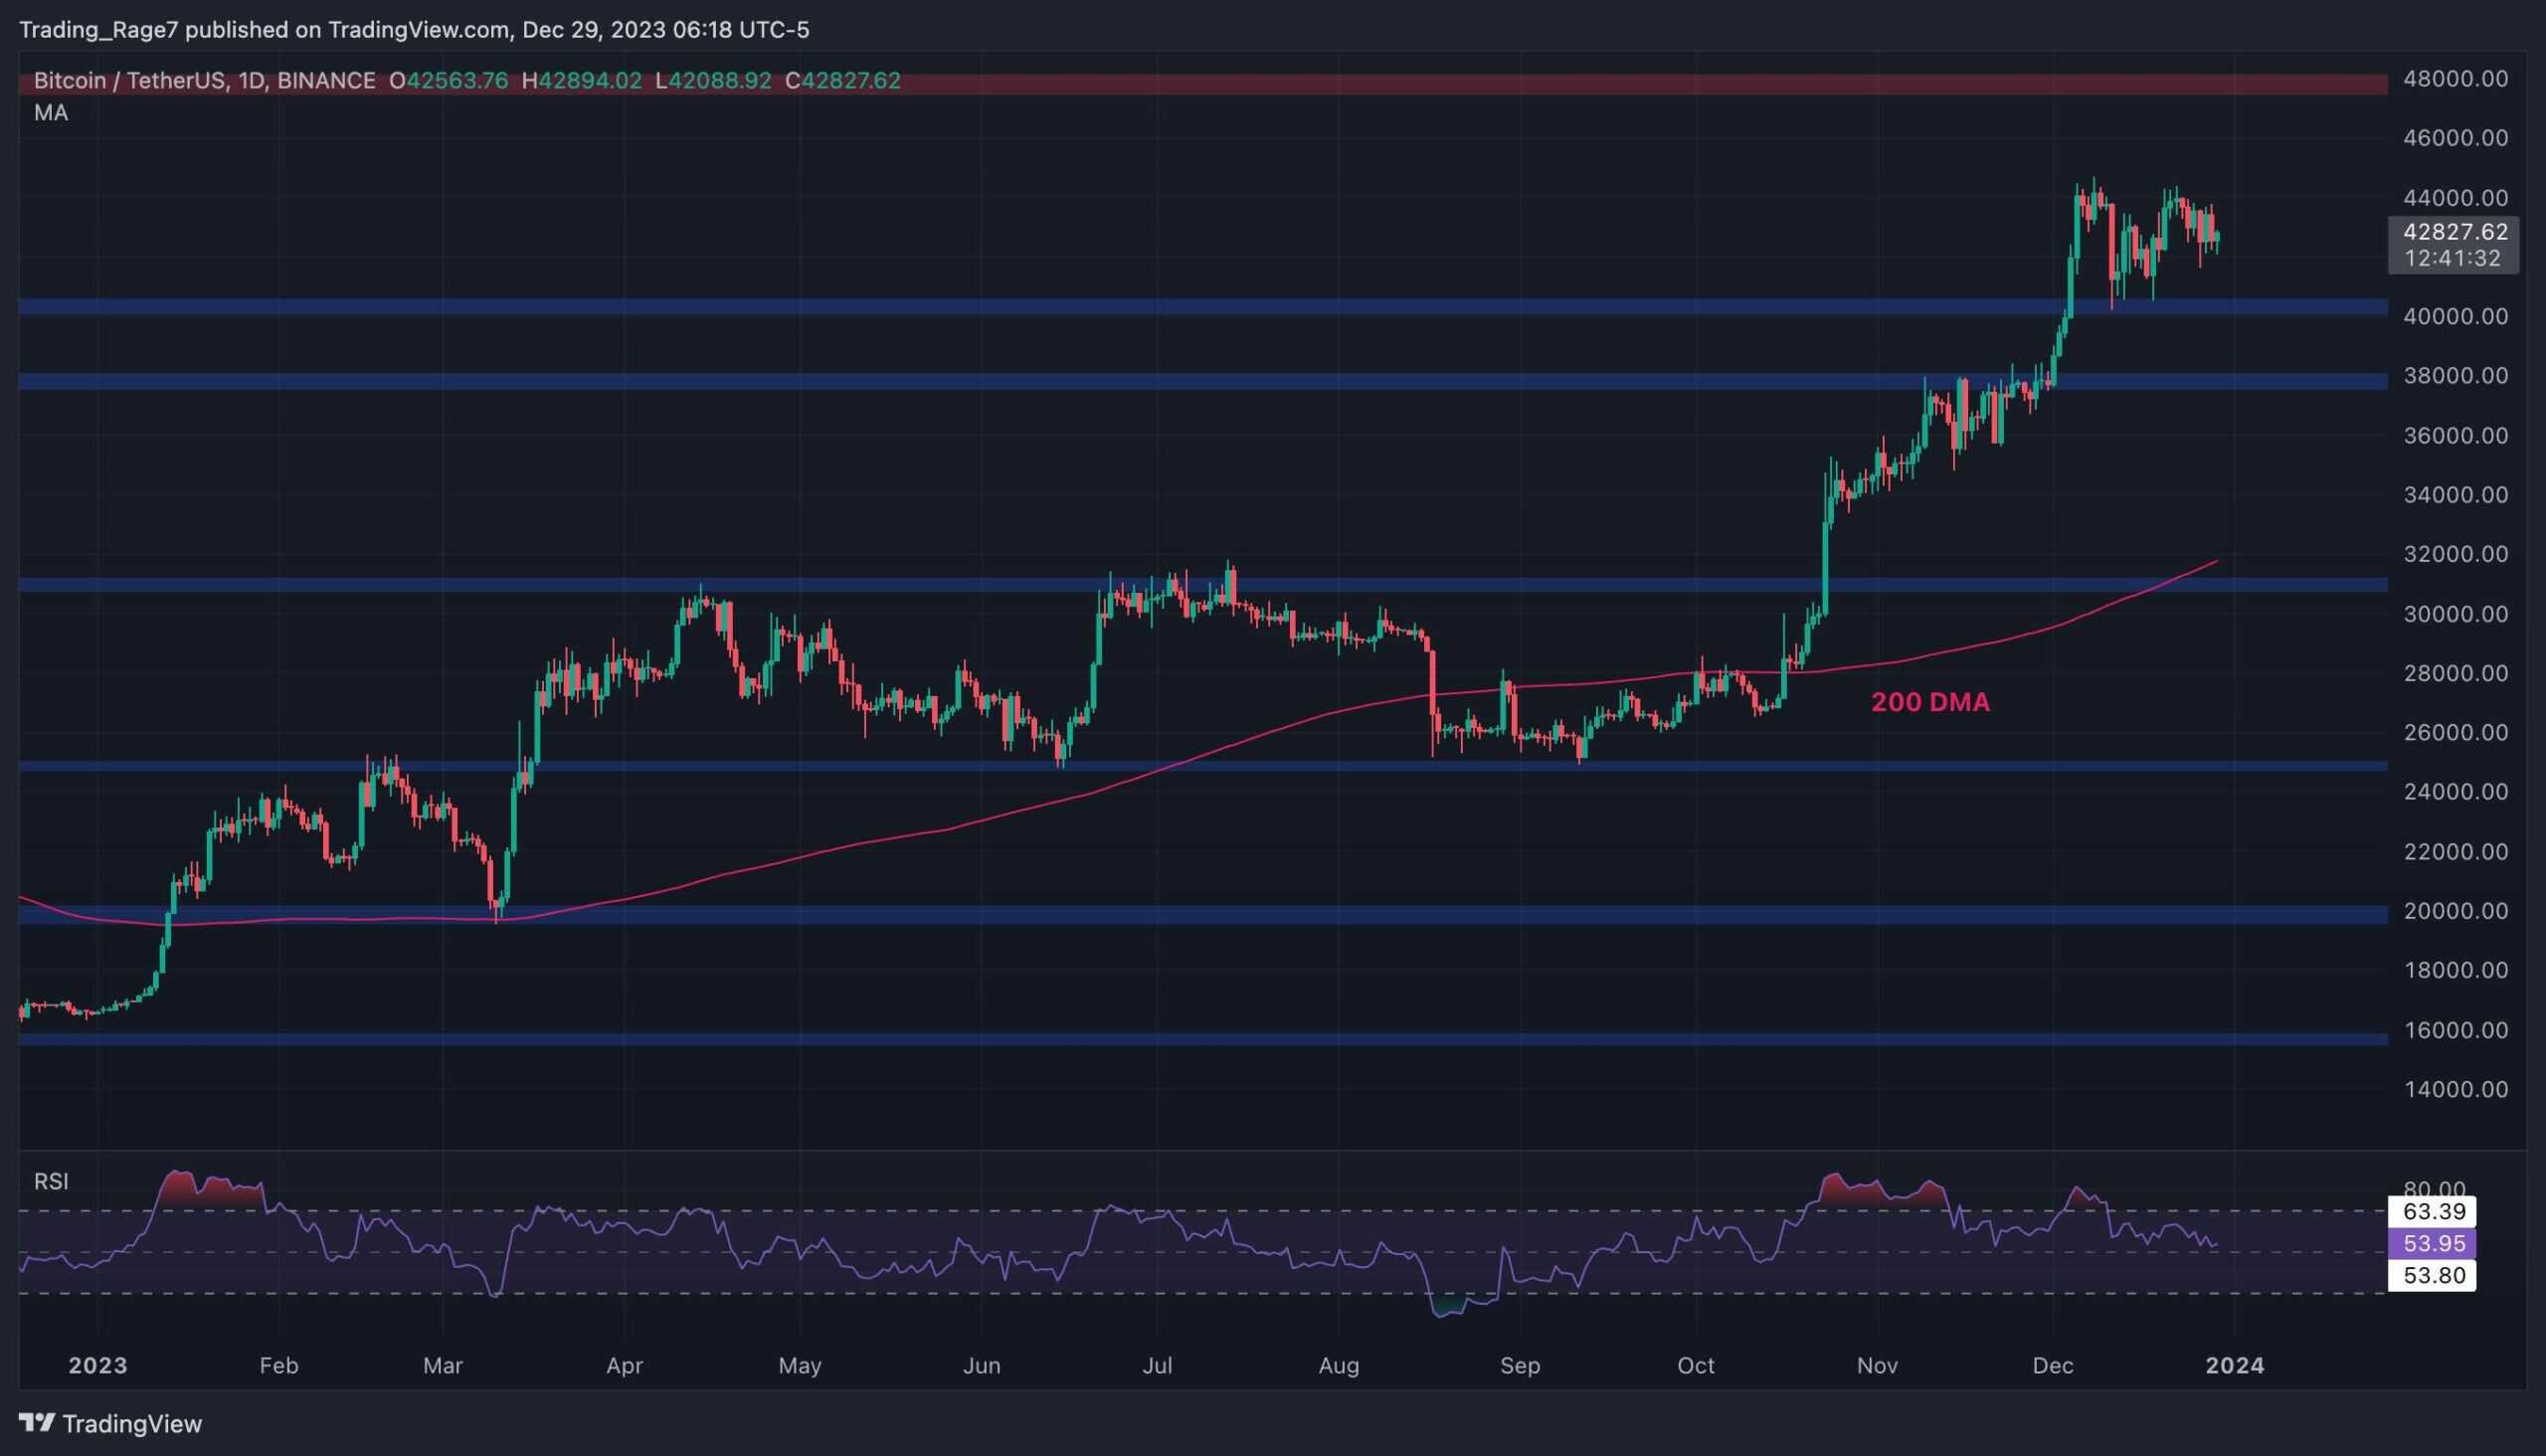 Will Bitcoin Drop Below $40K or is a Major Bounce in Play? (BTC Price Analysis)